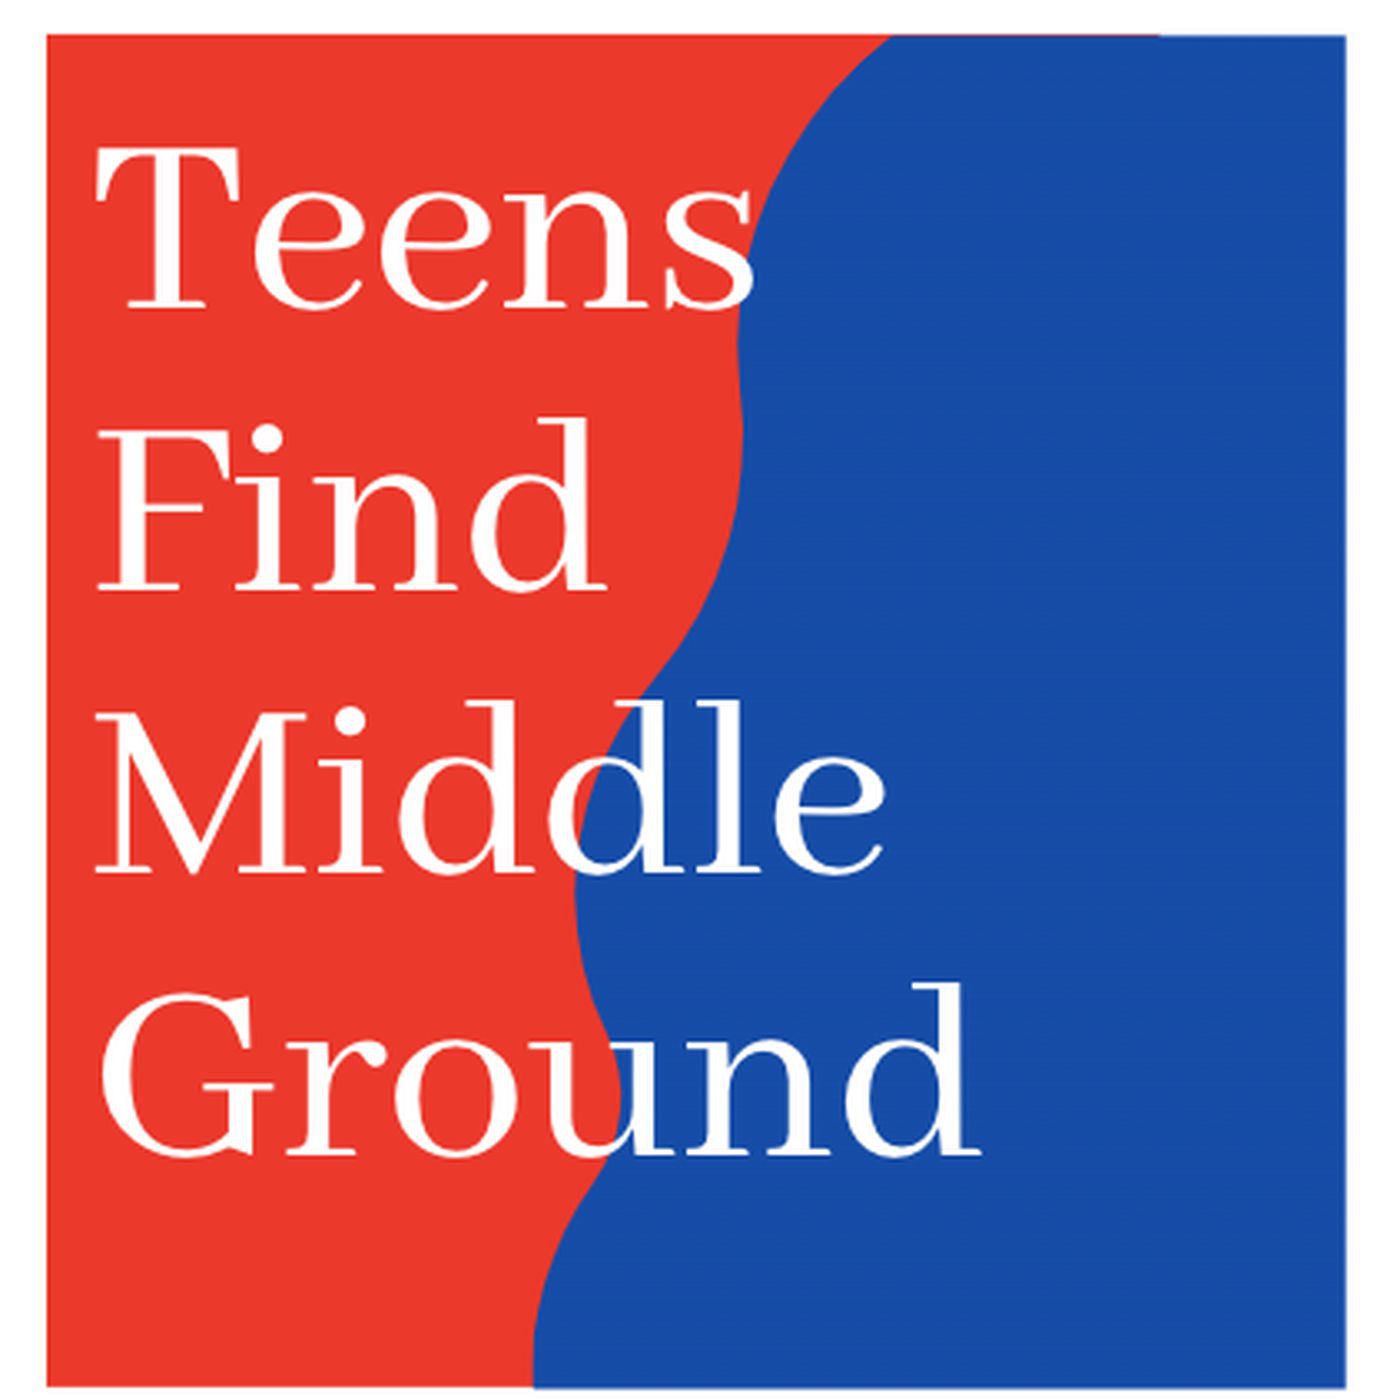 Teens Find Middle Ground